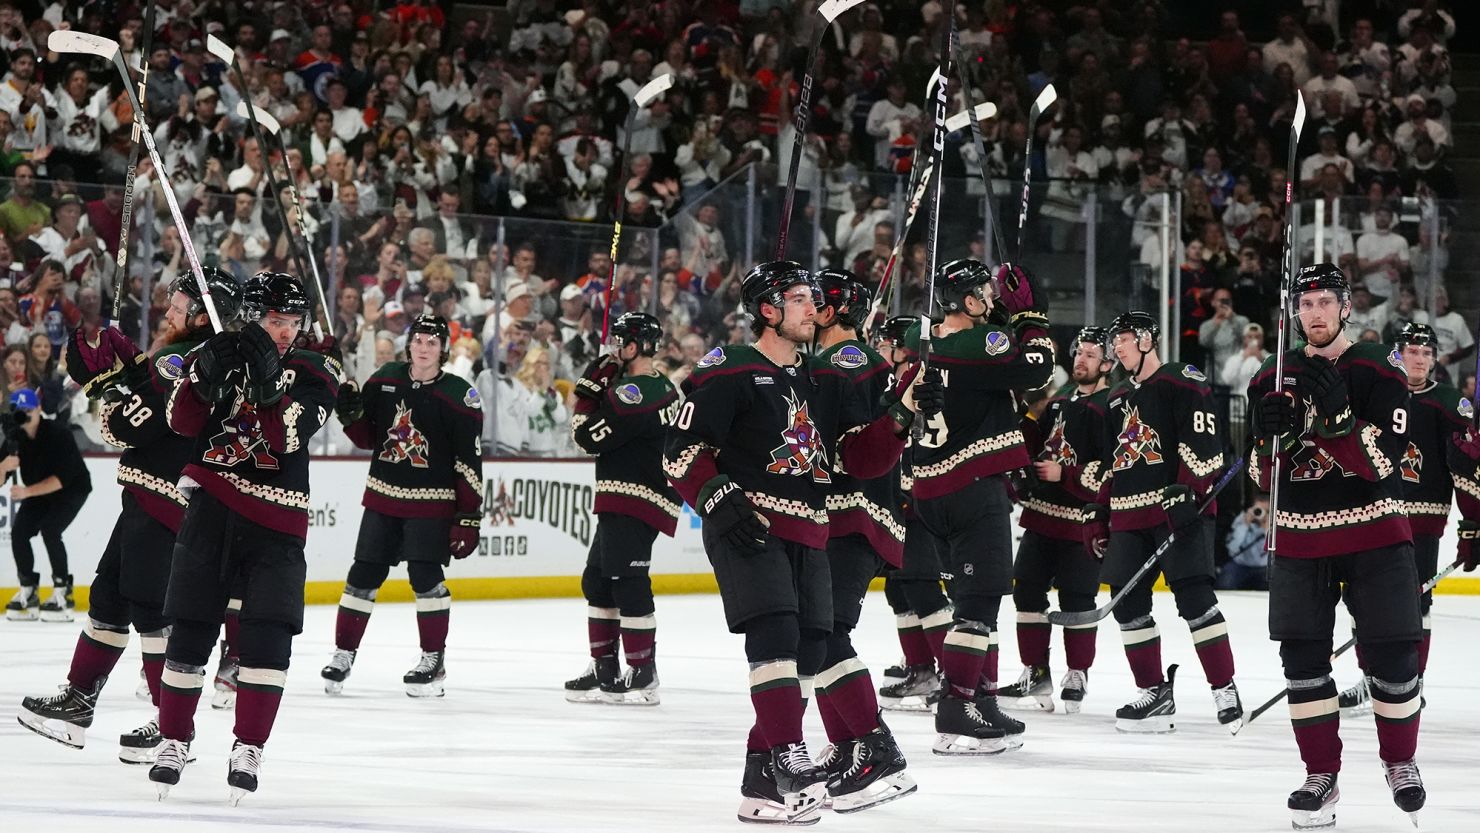 Arizona Coyotes players acknowledge fans after a game against the Edmonton Oilers on Wednesday.